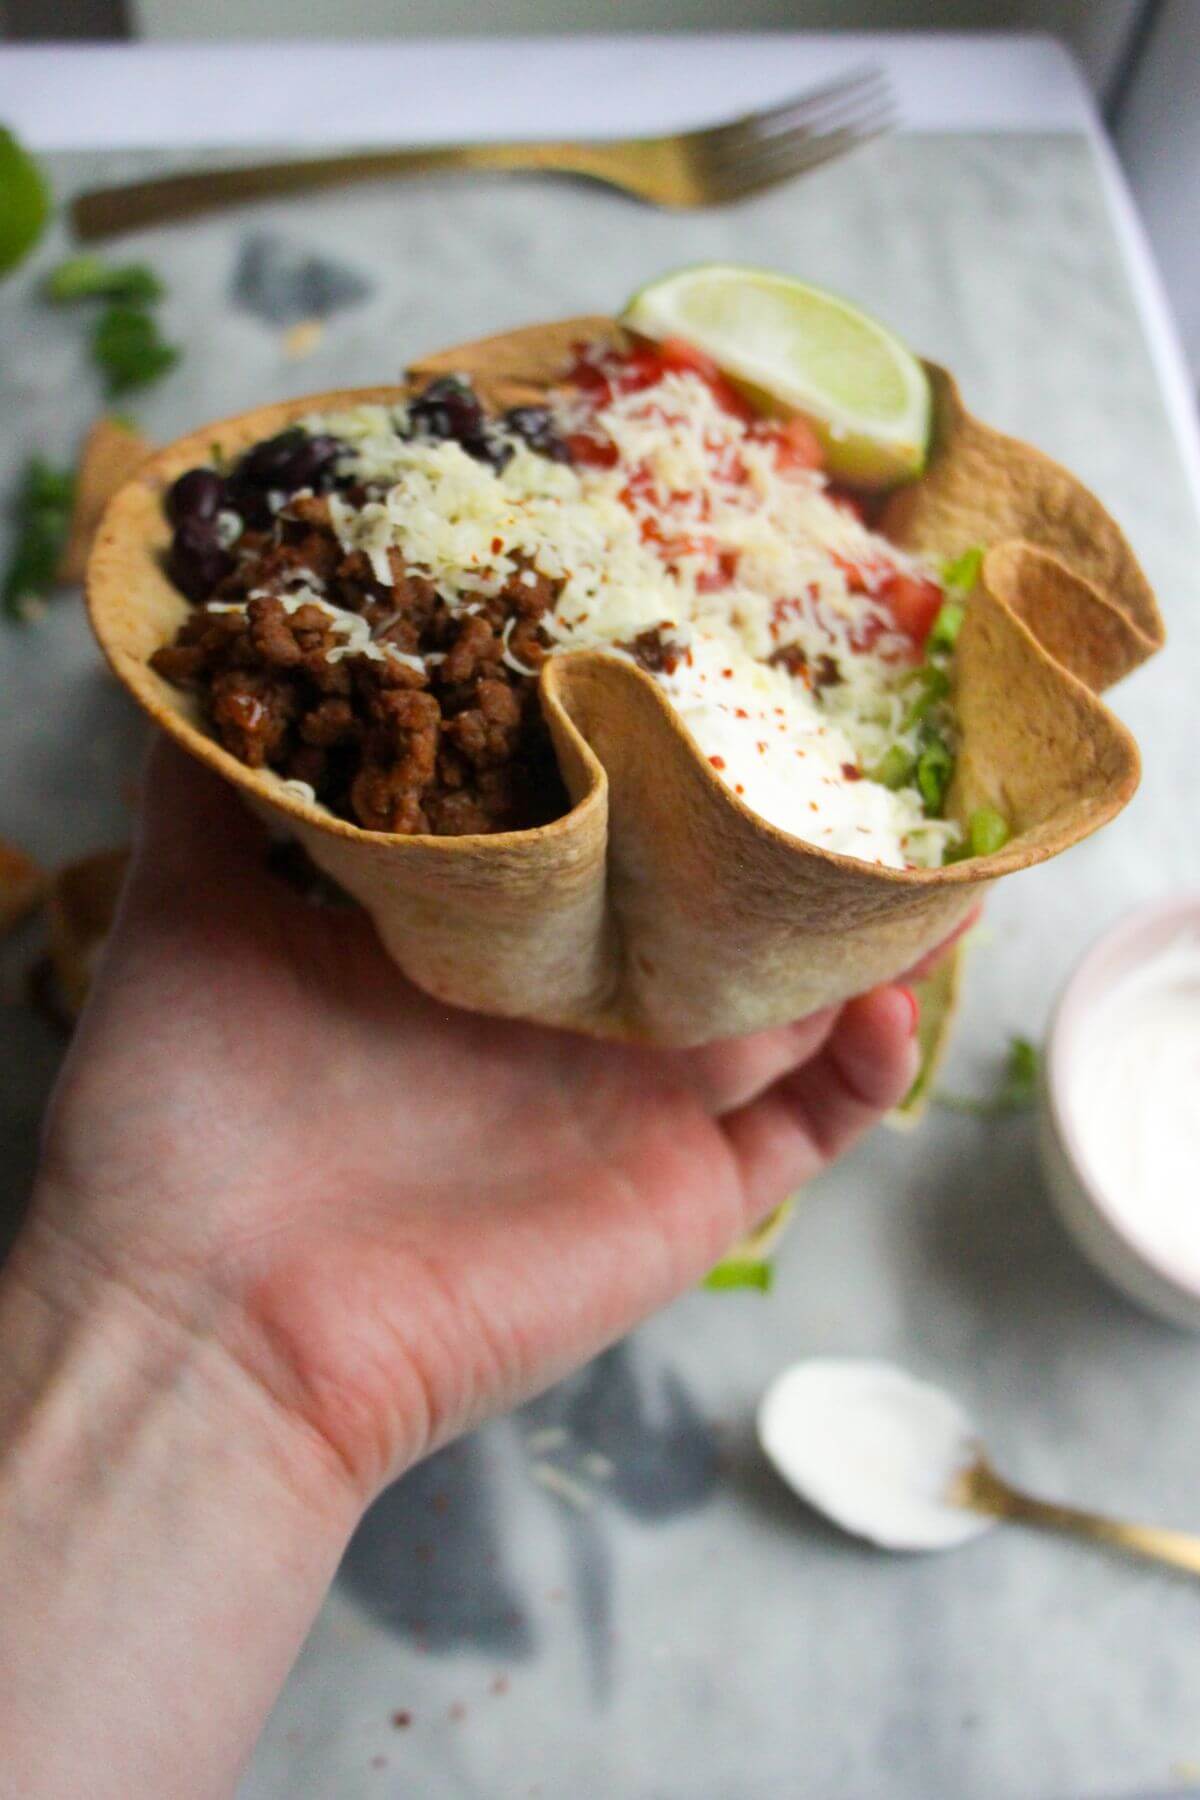 Hand holding loaded taco salad bowl with small jar of yogurt in the background.